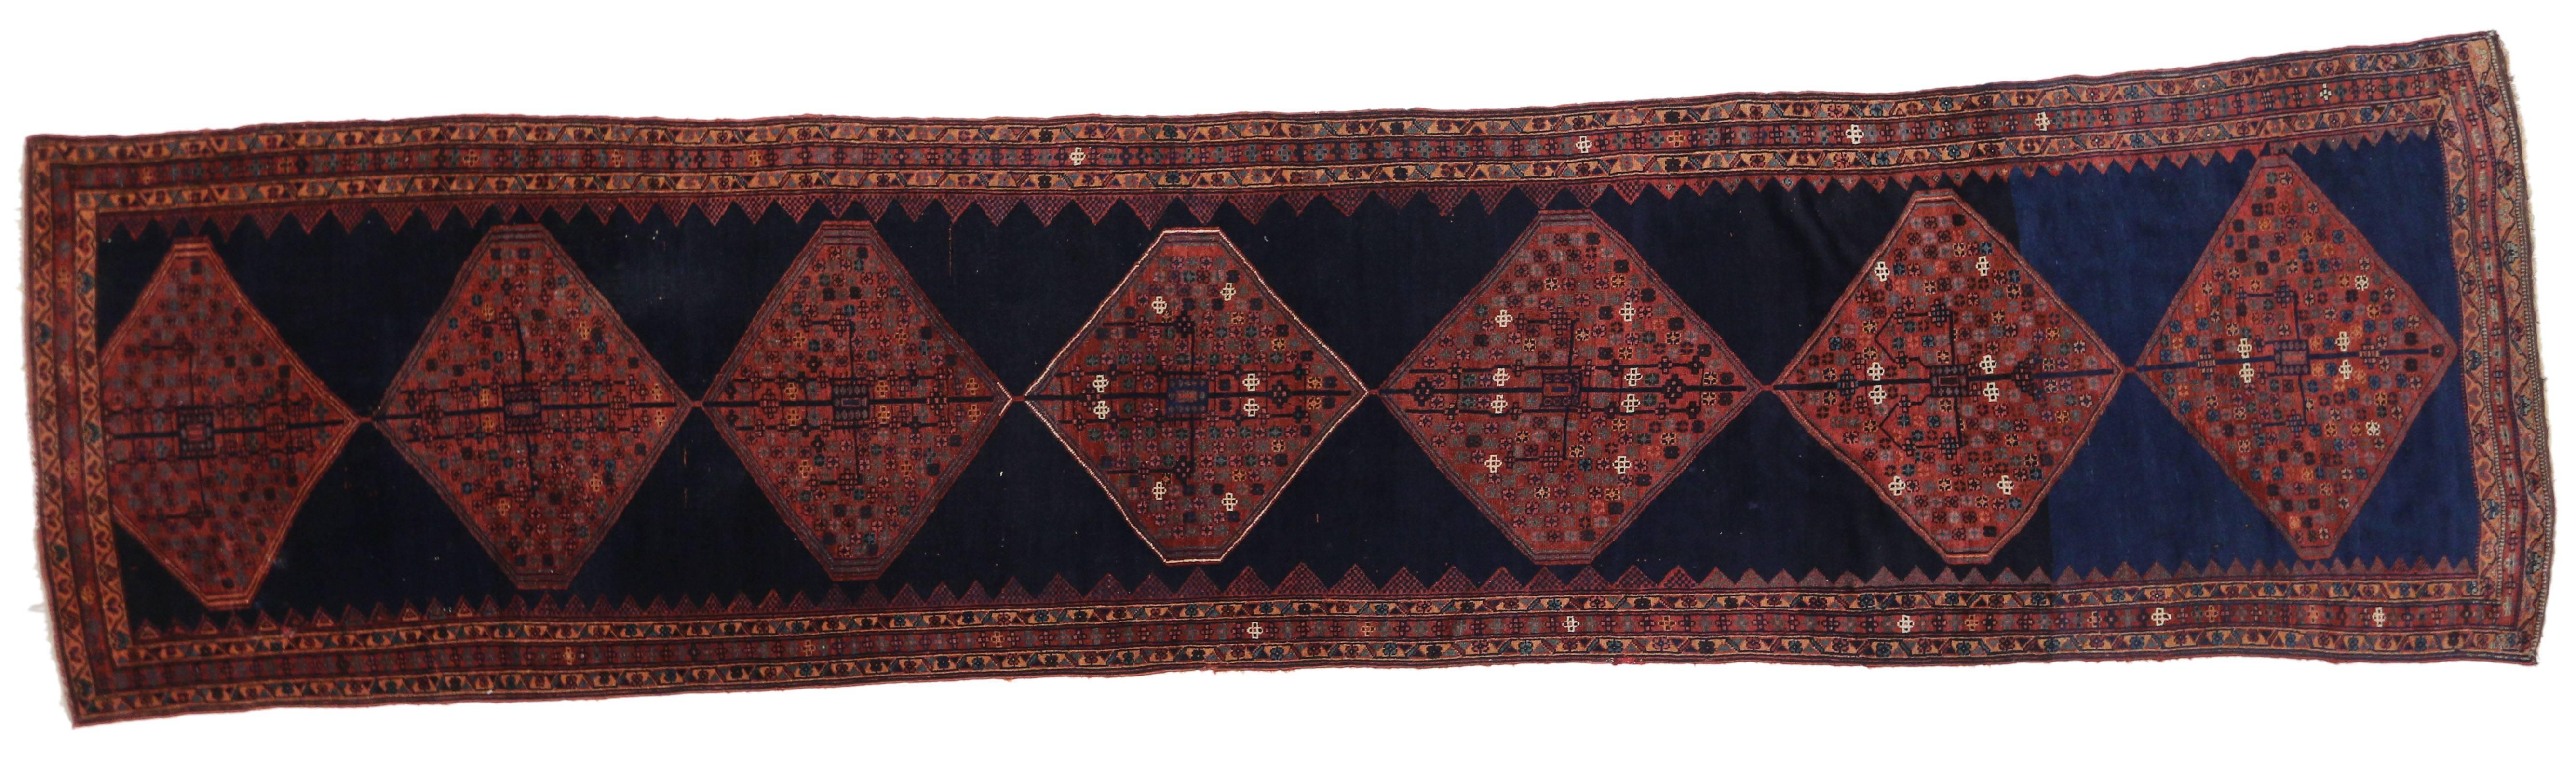 Hand-Knotted Antique Persian Kurdish Runner, Extra-Long Hallway Runner For Sale